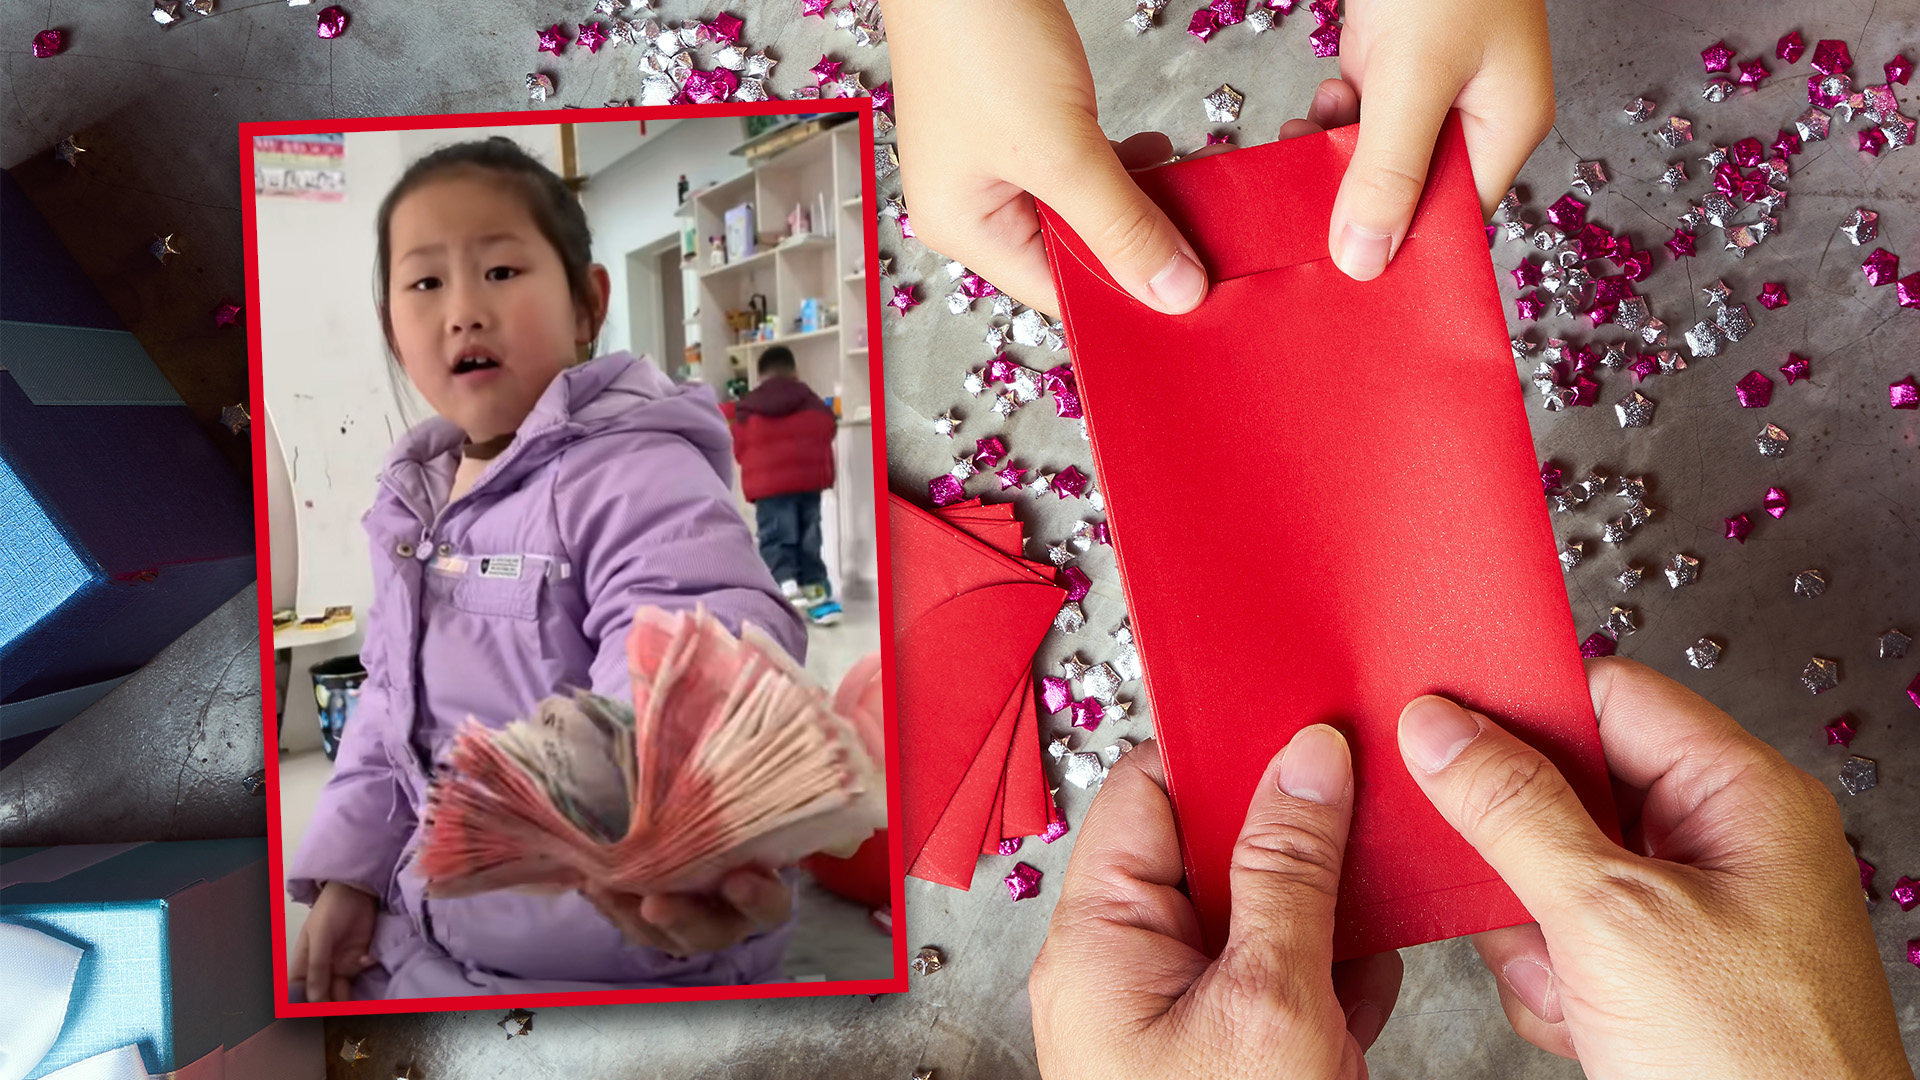 A seven-year-old girl in China who tried to give her mother the US$900 in “lucky money” she received from relatives as a gift of thanks for raising her and her younger brother has melted hearts on mainland social media. Photo: SCMP composite/Shutterstock/Douyin